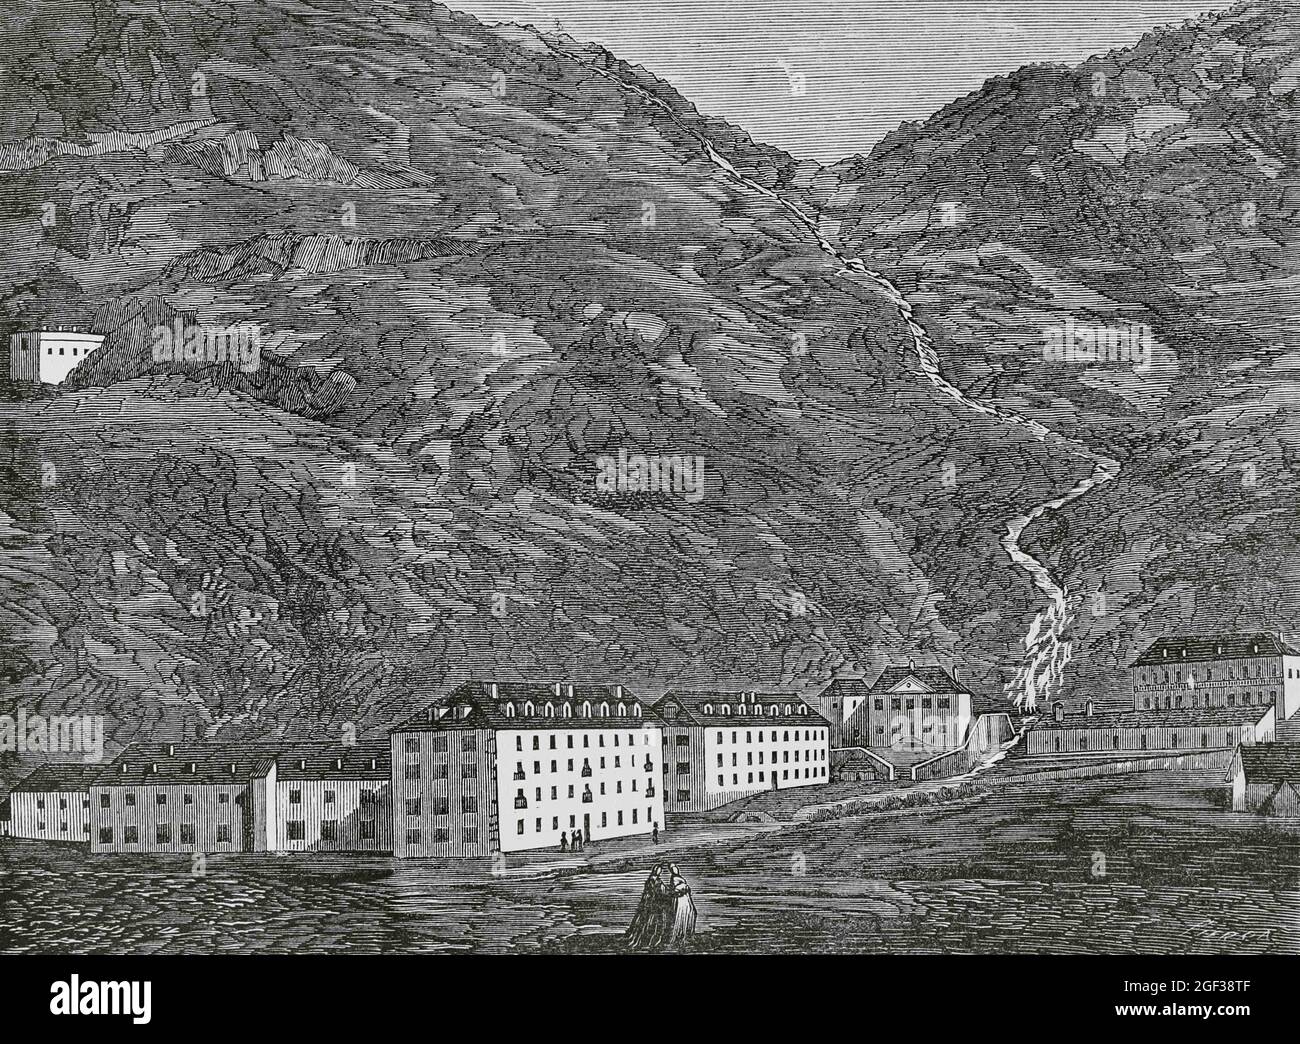 Spain, Aragon, Huesca province. Panticosa Baths. Panoramic view of the thermal complex. Engraving by Sierra. Cronica General de España, Historia Ilust Stock Photo